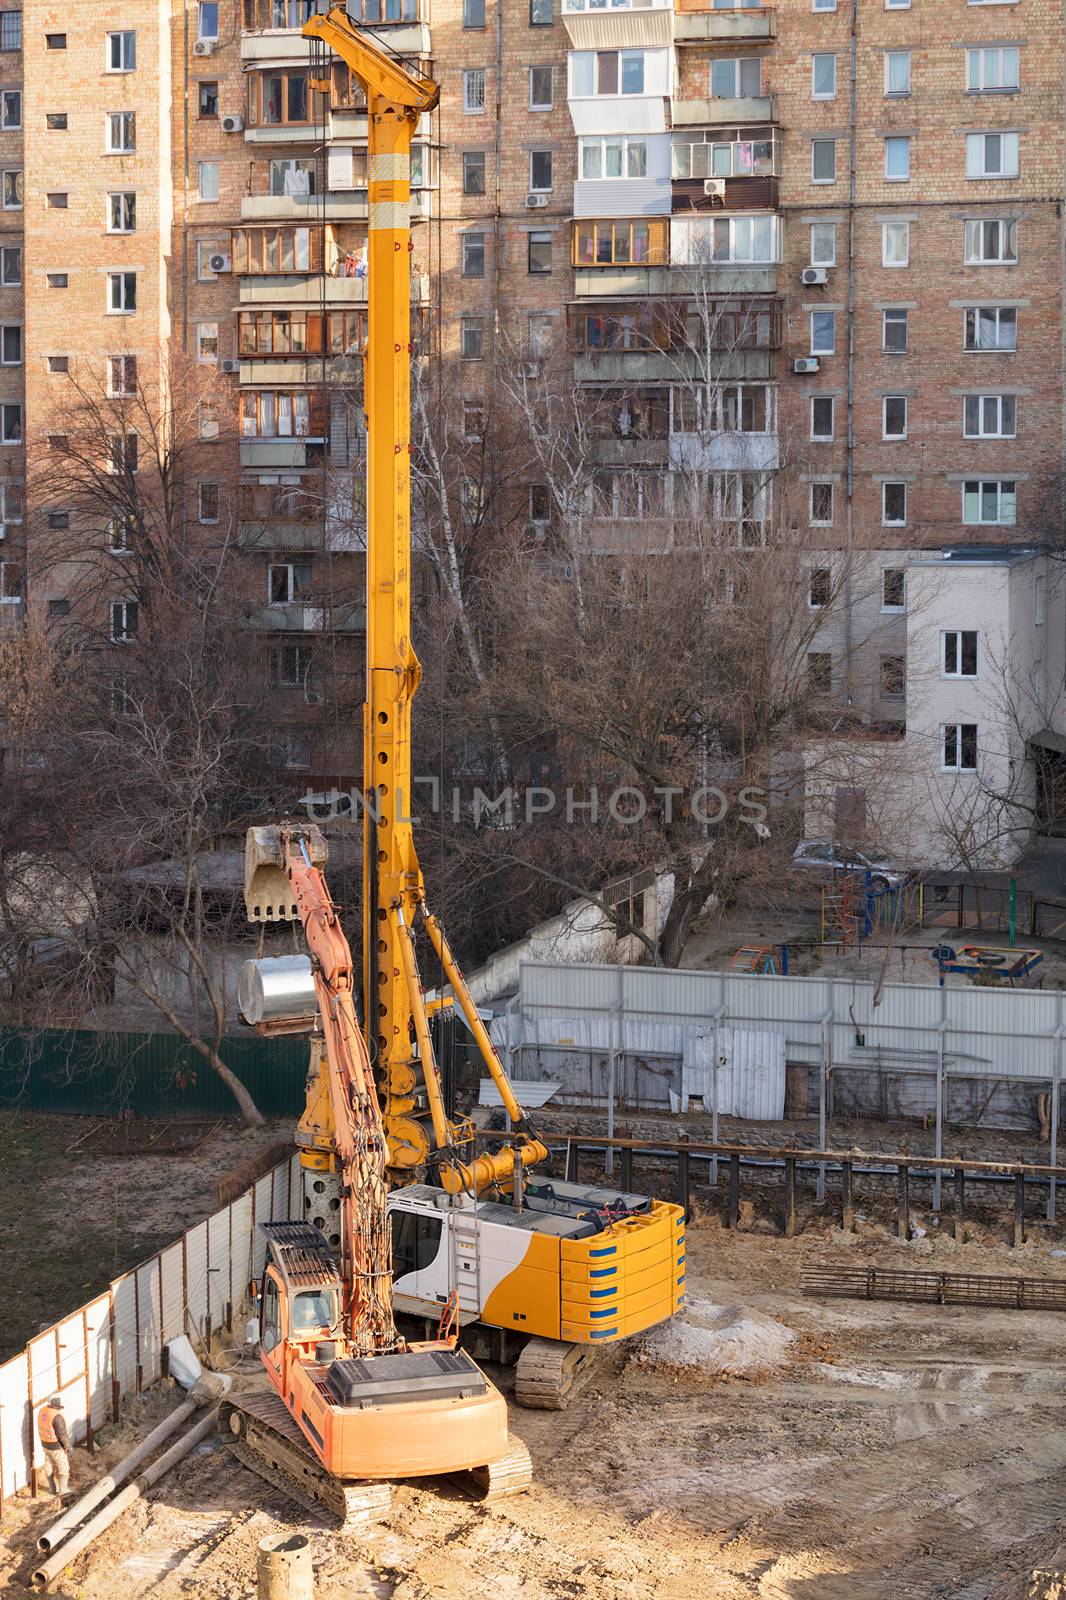 Heavy crawler-mounted construction equipment works on a fenced construction site among residential buildings on a city street. by Sergii